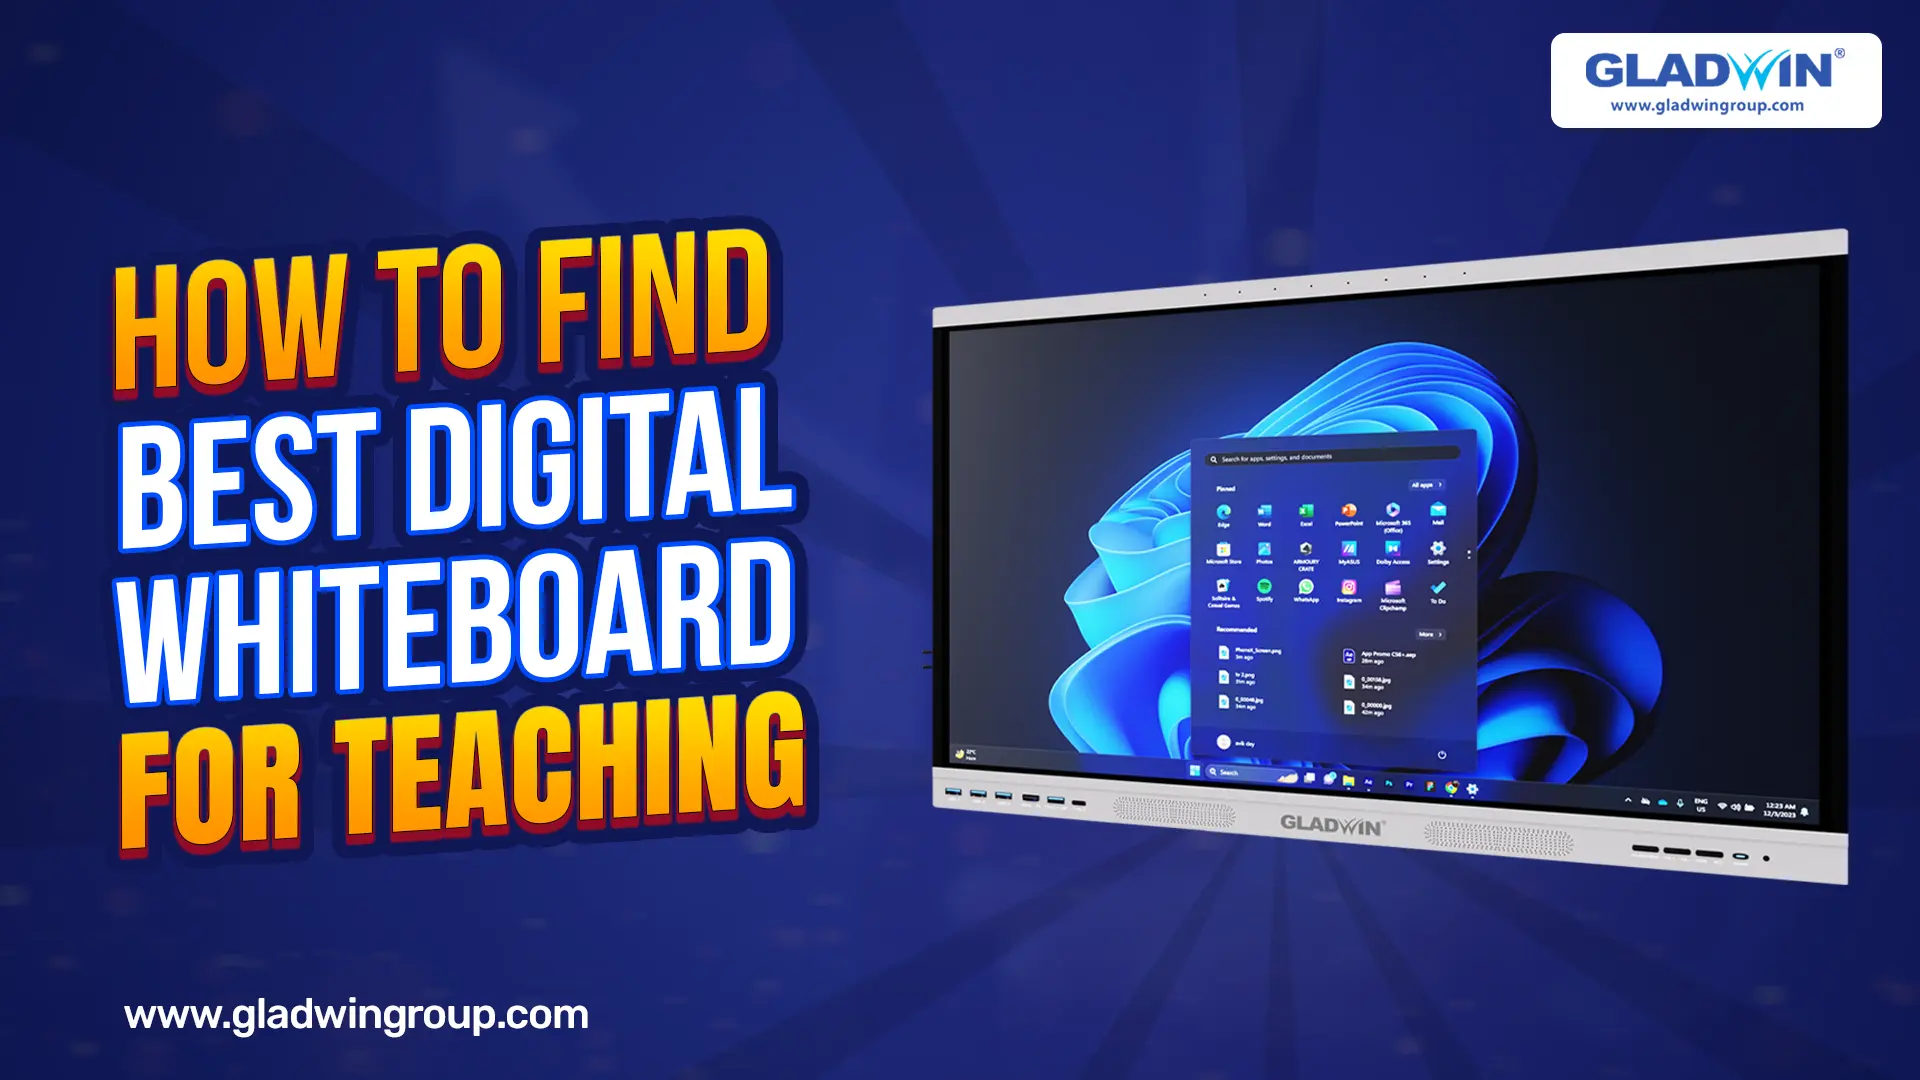 best digital whiteboard for teaching offered by Gladwin Group